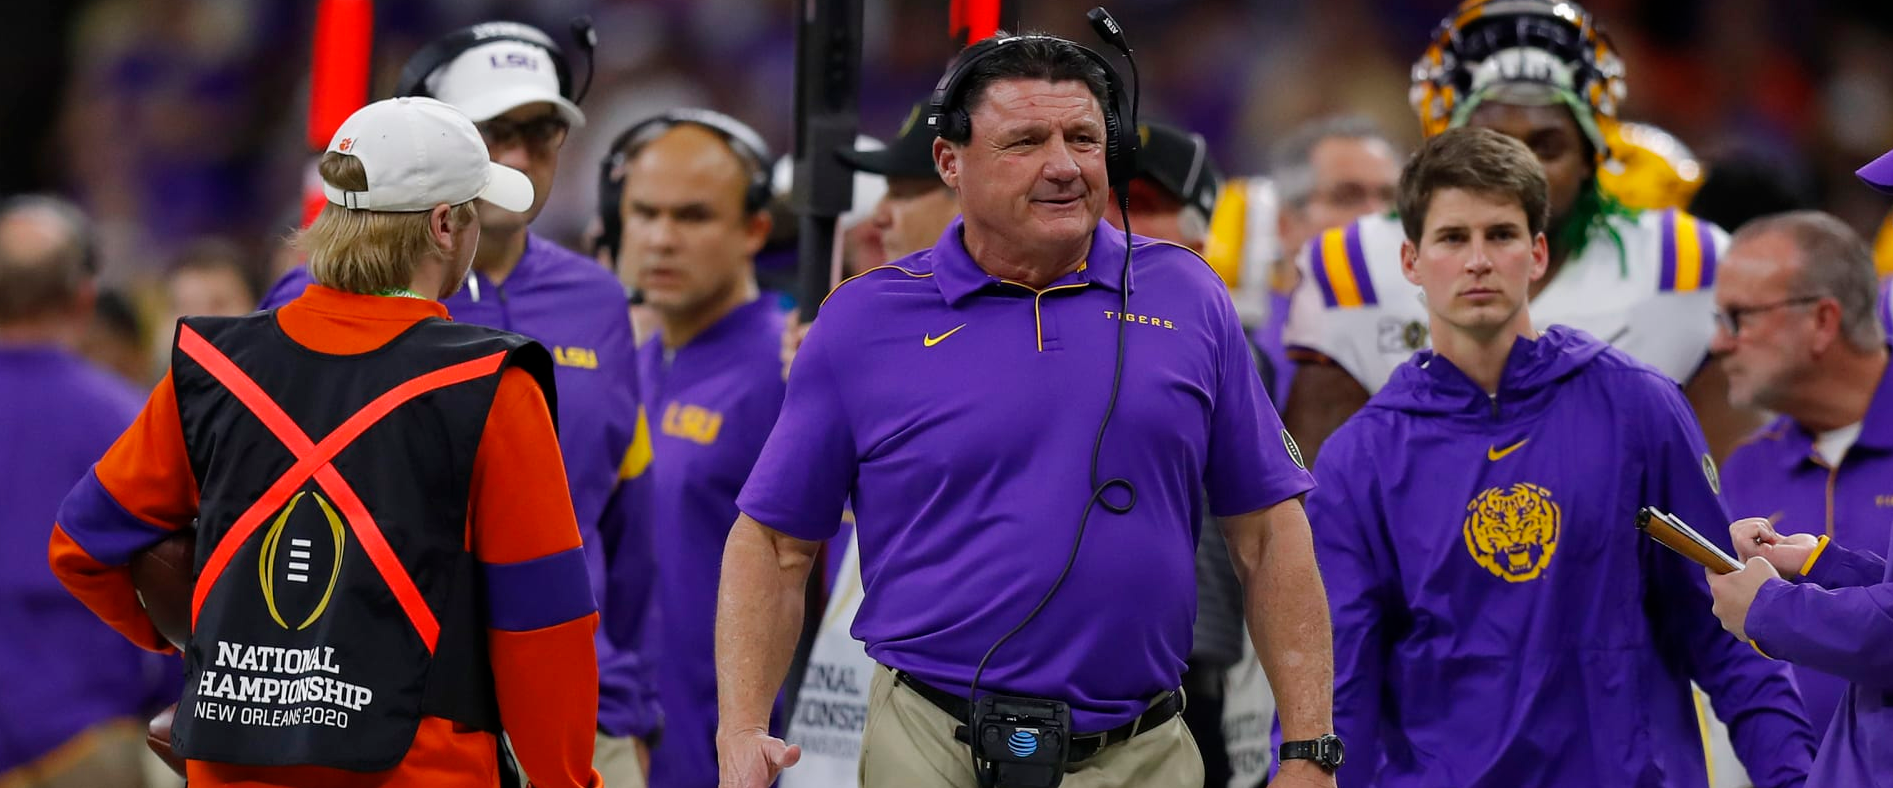 Obstructed List of LSU Coaching Candidates